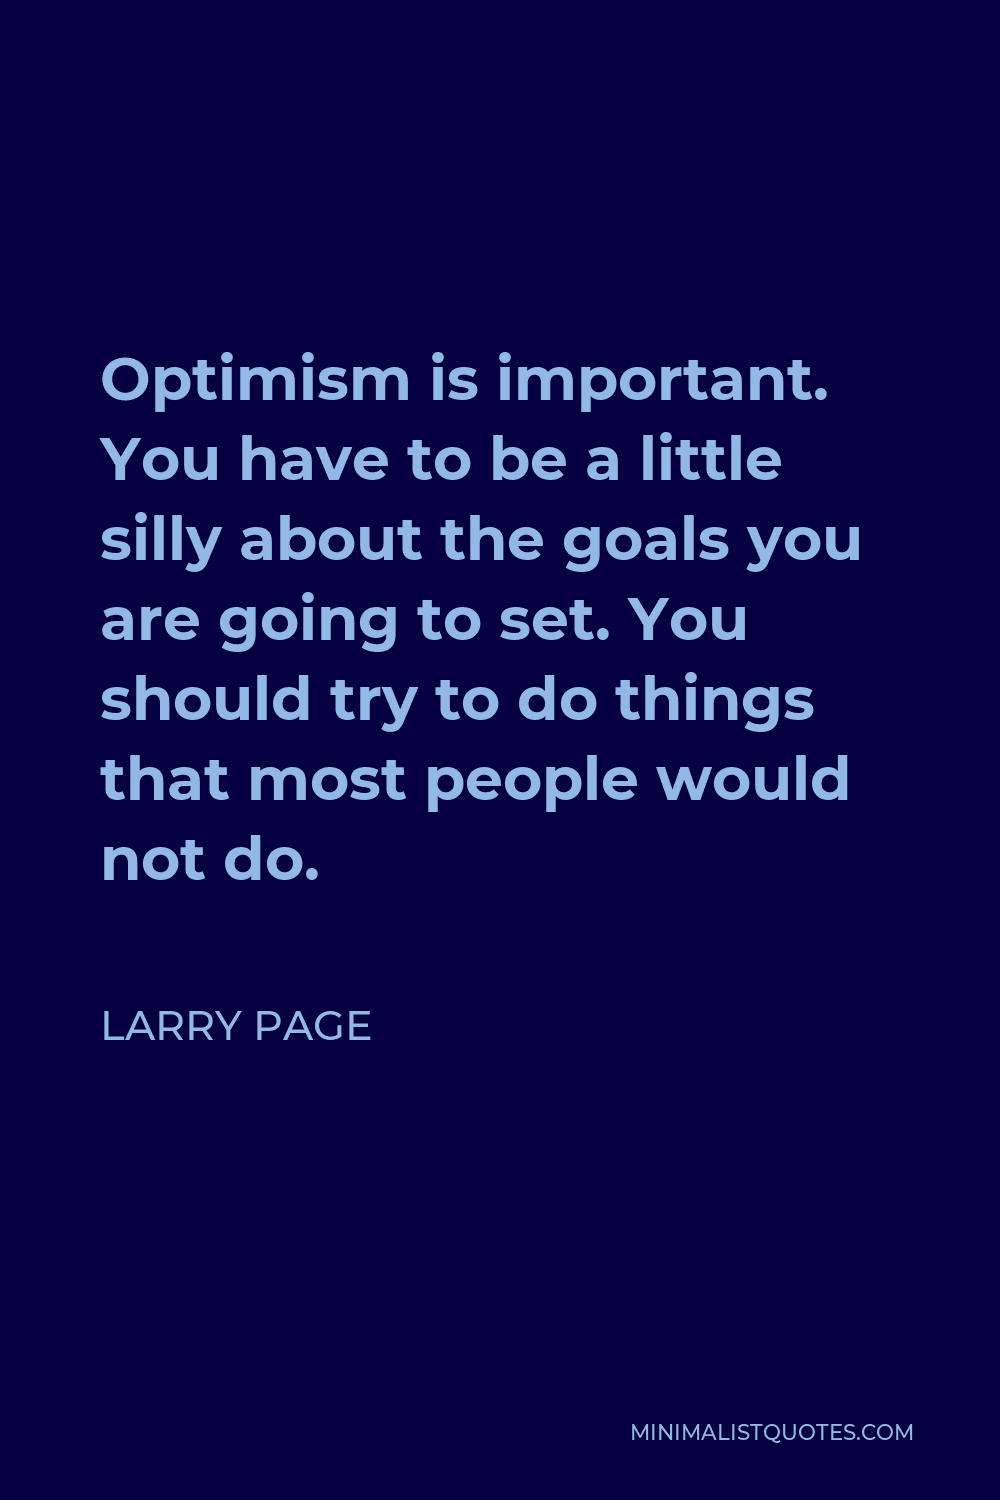 Larry Page Quote - Optimism is important. You have to be a little silly about the goals you are going to set. You should try to do things that most people would not do.